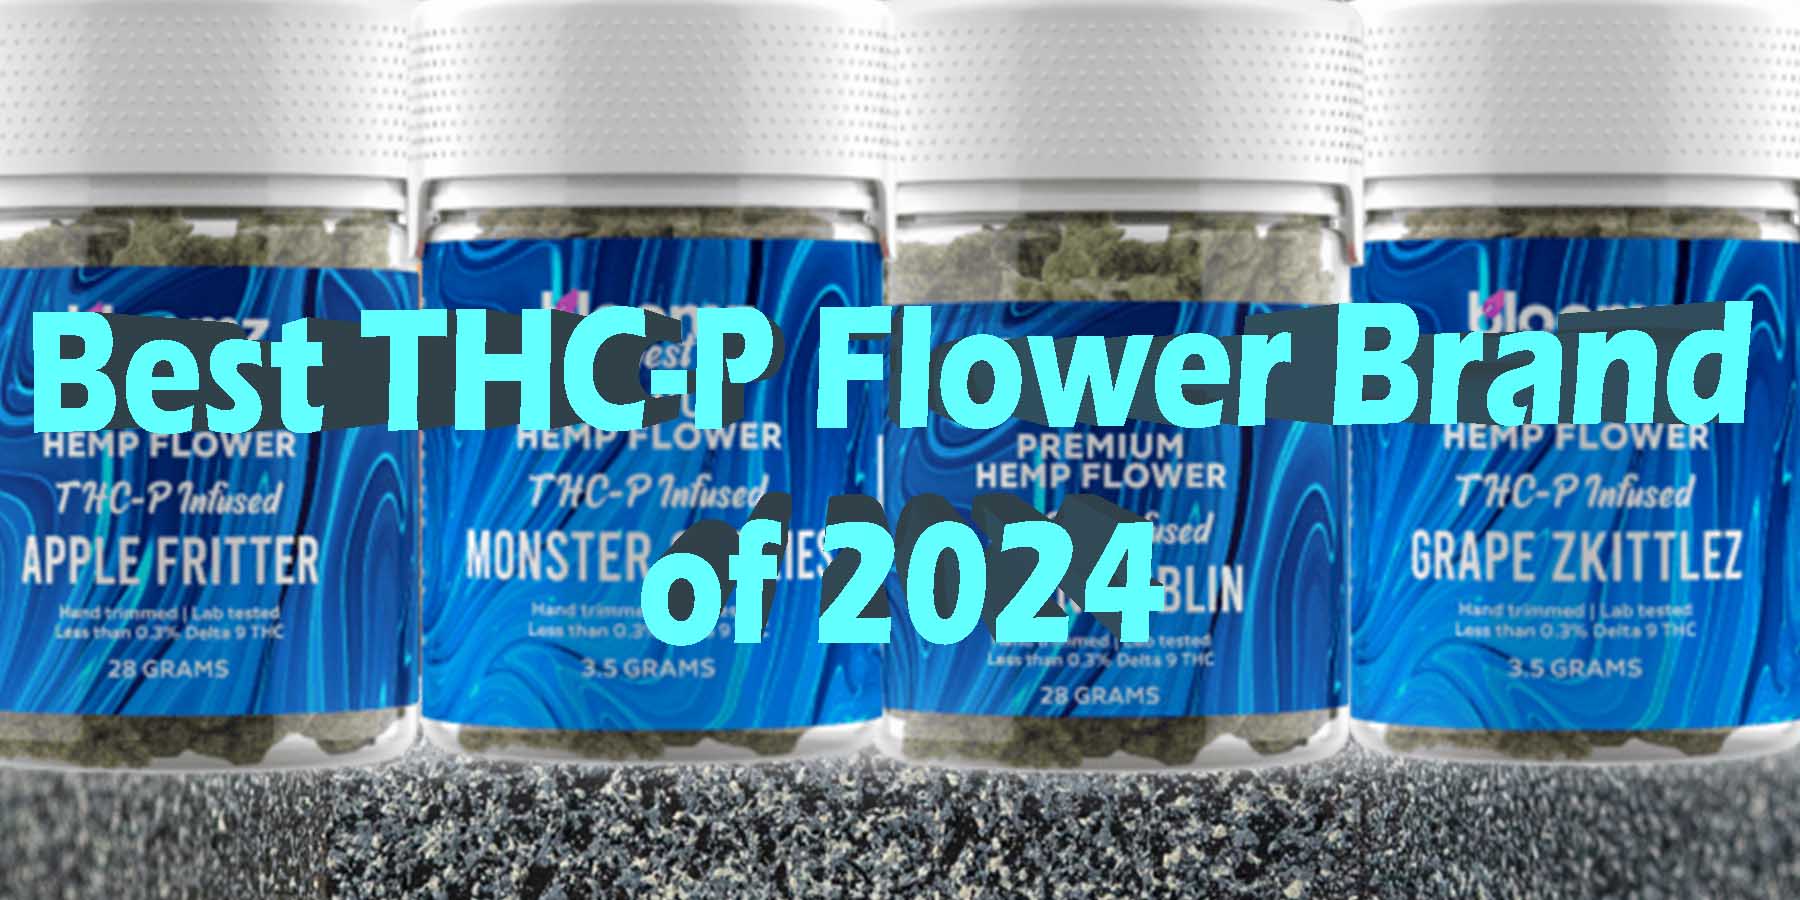 Best THC-P Flower Brand of 2024 WhereToGet HowToGetNearMe BestPlace LowestPrice Coupon Discount For-Smoking Best High Smoke Shop Online Near Me StrongestBrand BestBrand